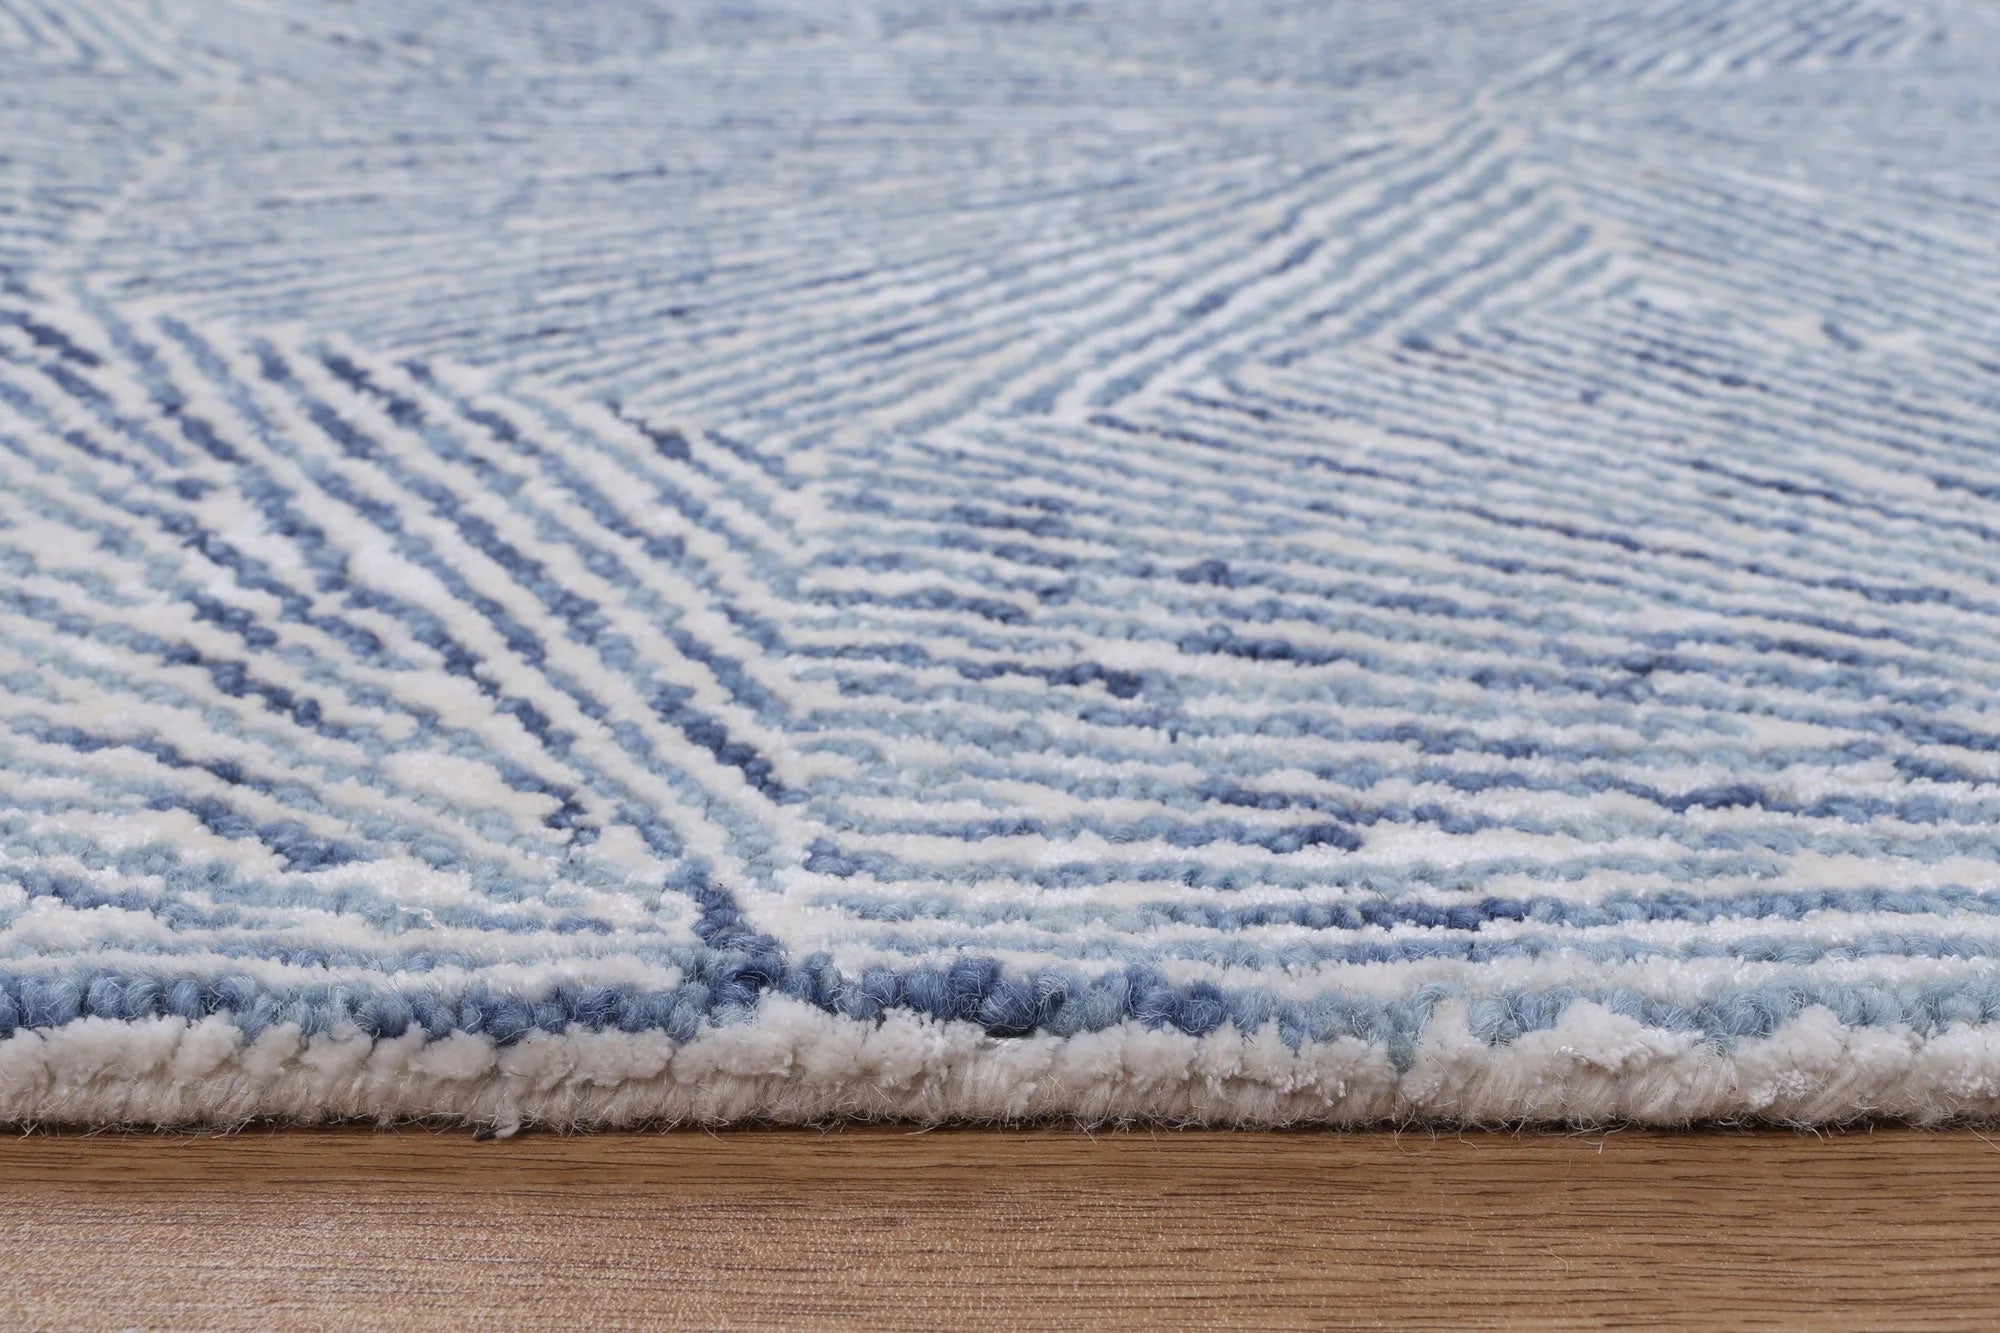 Close-up view of the Astrid Hexagon Blue Rug showing its unique hexagon pattern in shades of blue and the intricate weave texture.